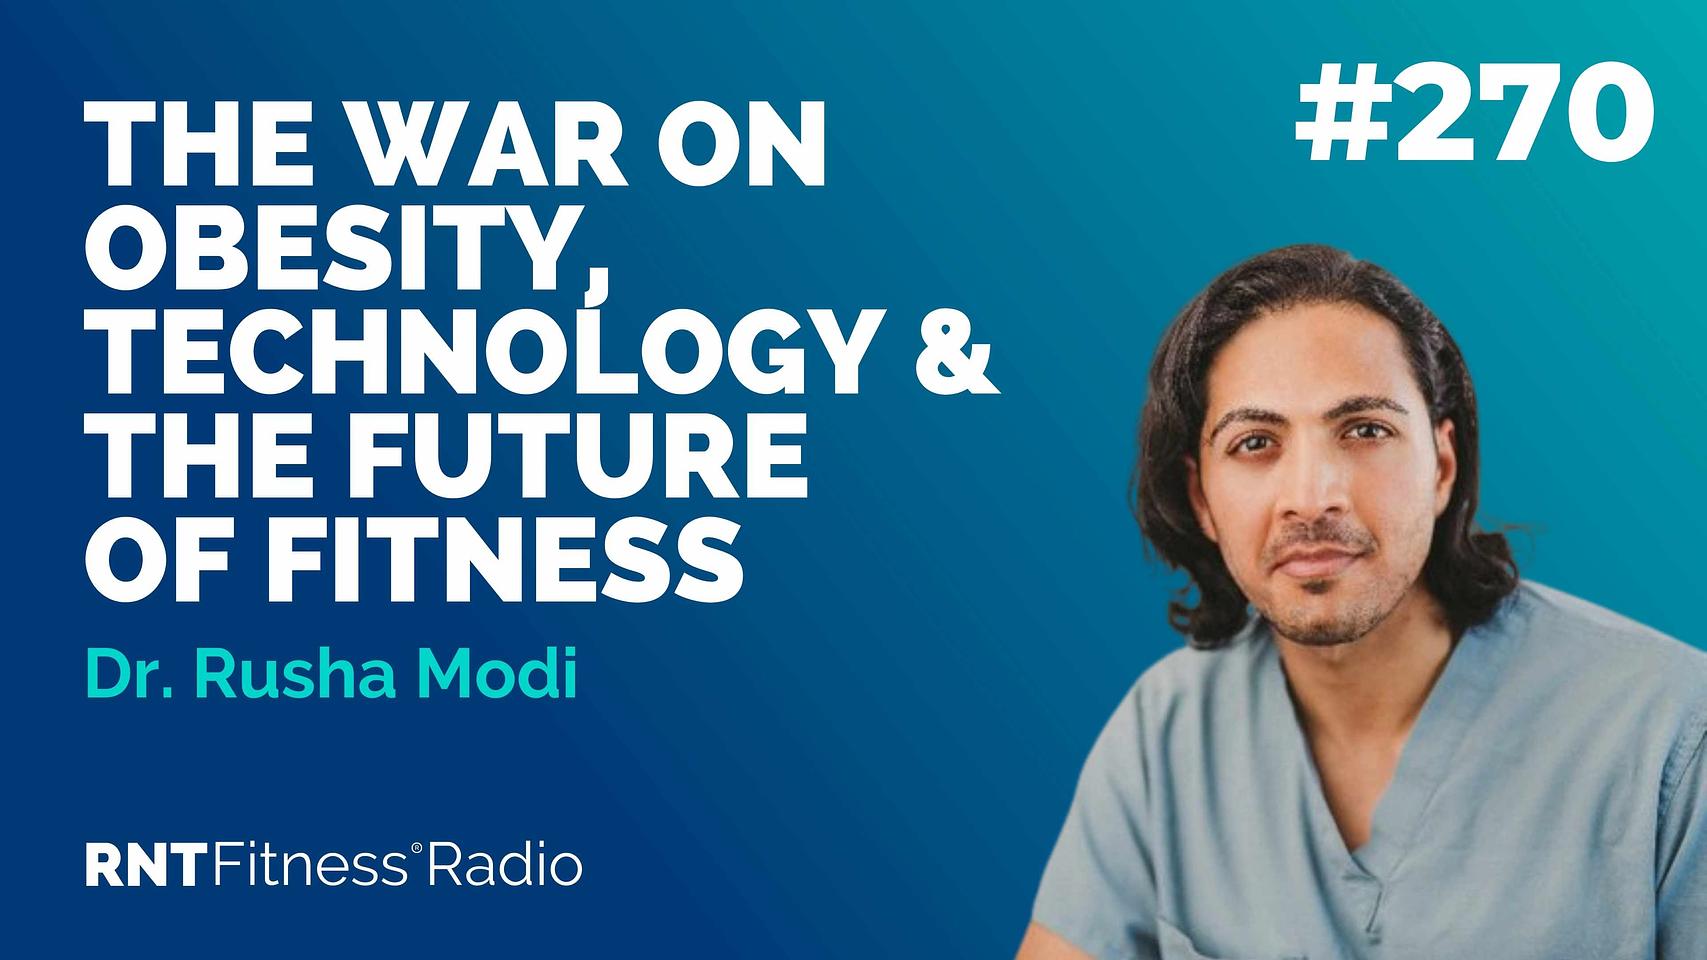 Ep. 270 - The War On Obesity, Technology & The Future Of Fitness w/ Dr. Rusha Modi